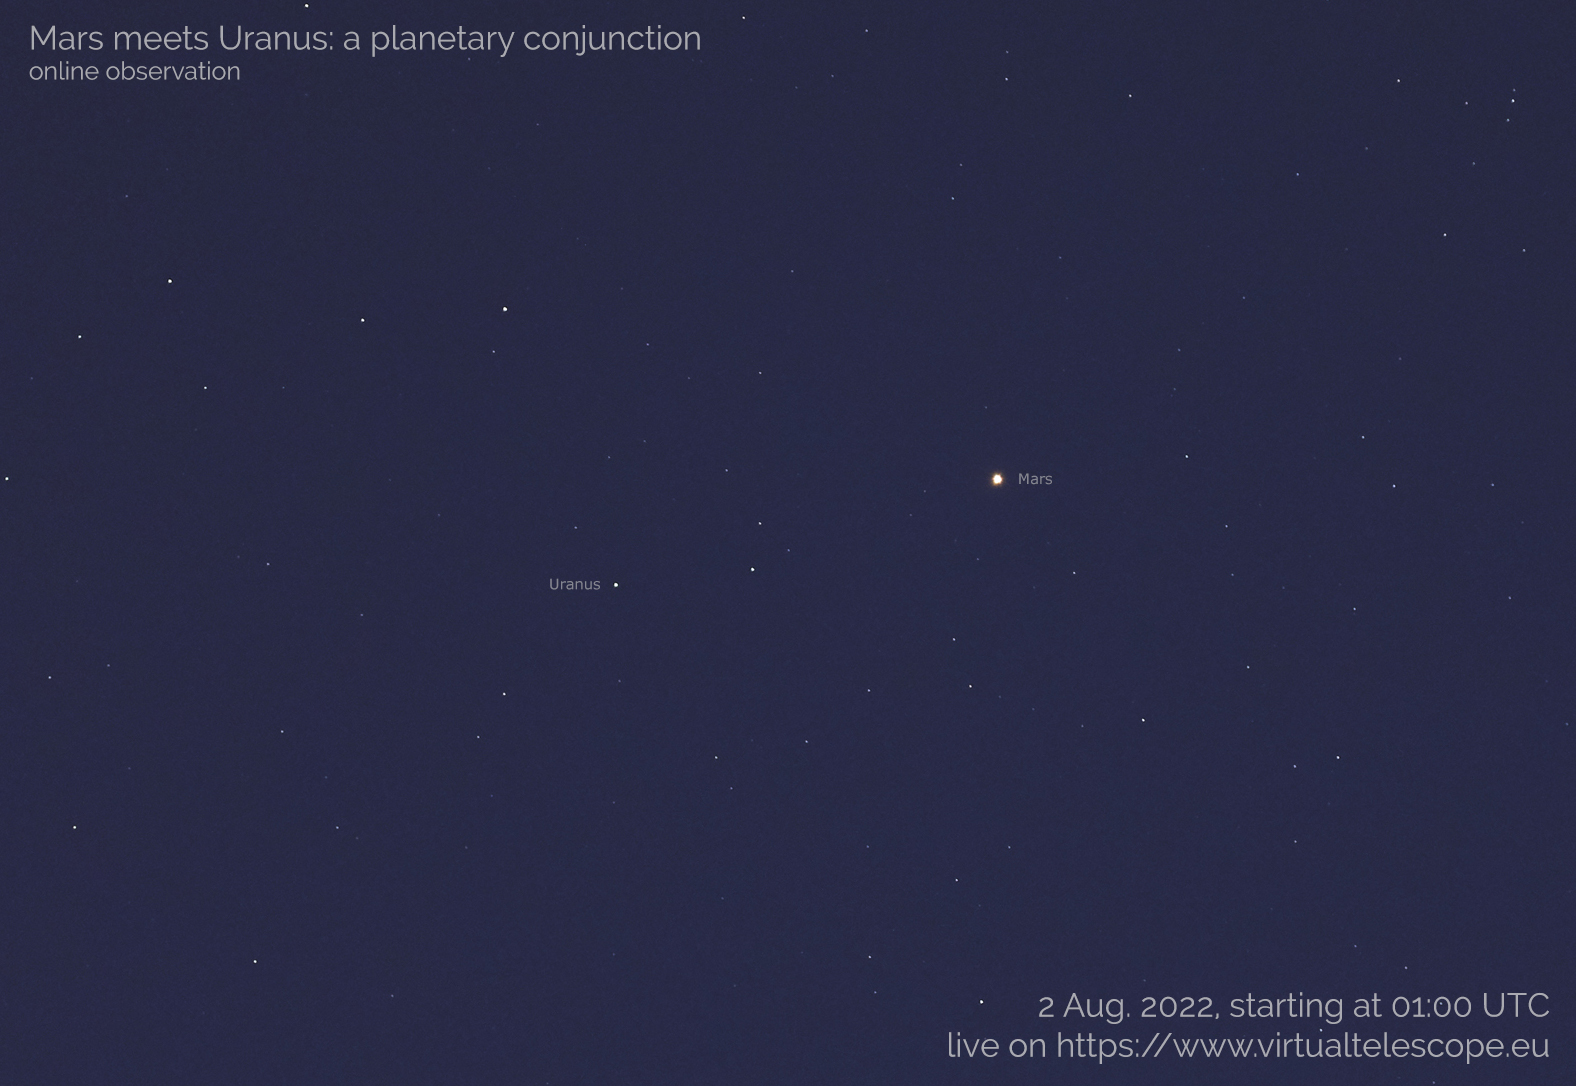 Mars and Uranus will line up in a rare conjunction' this